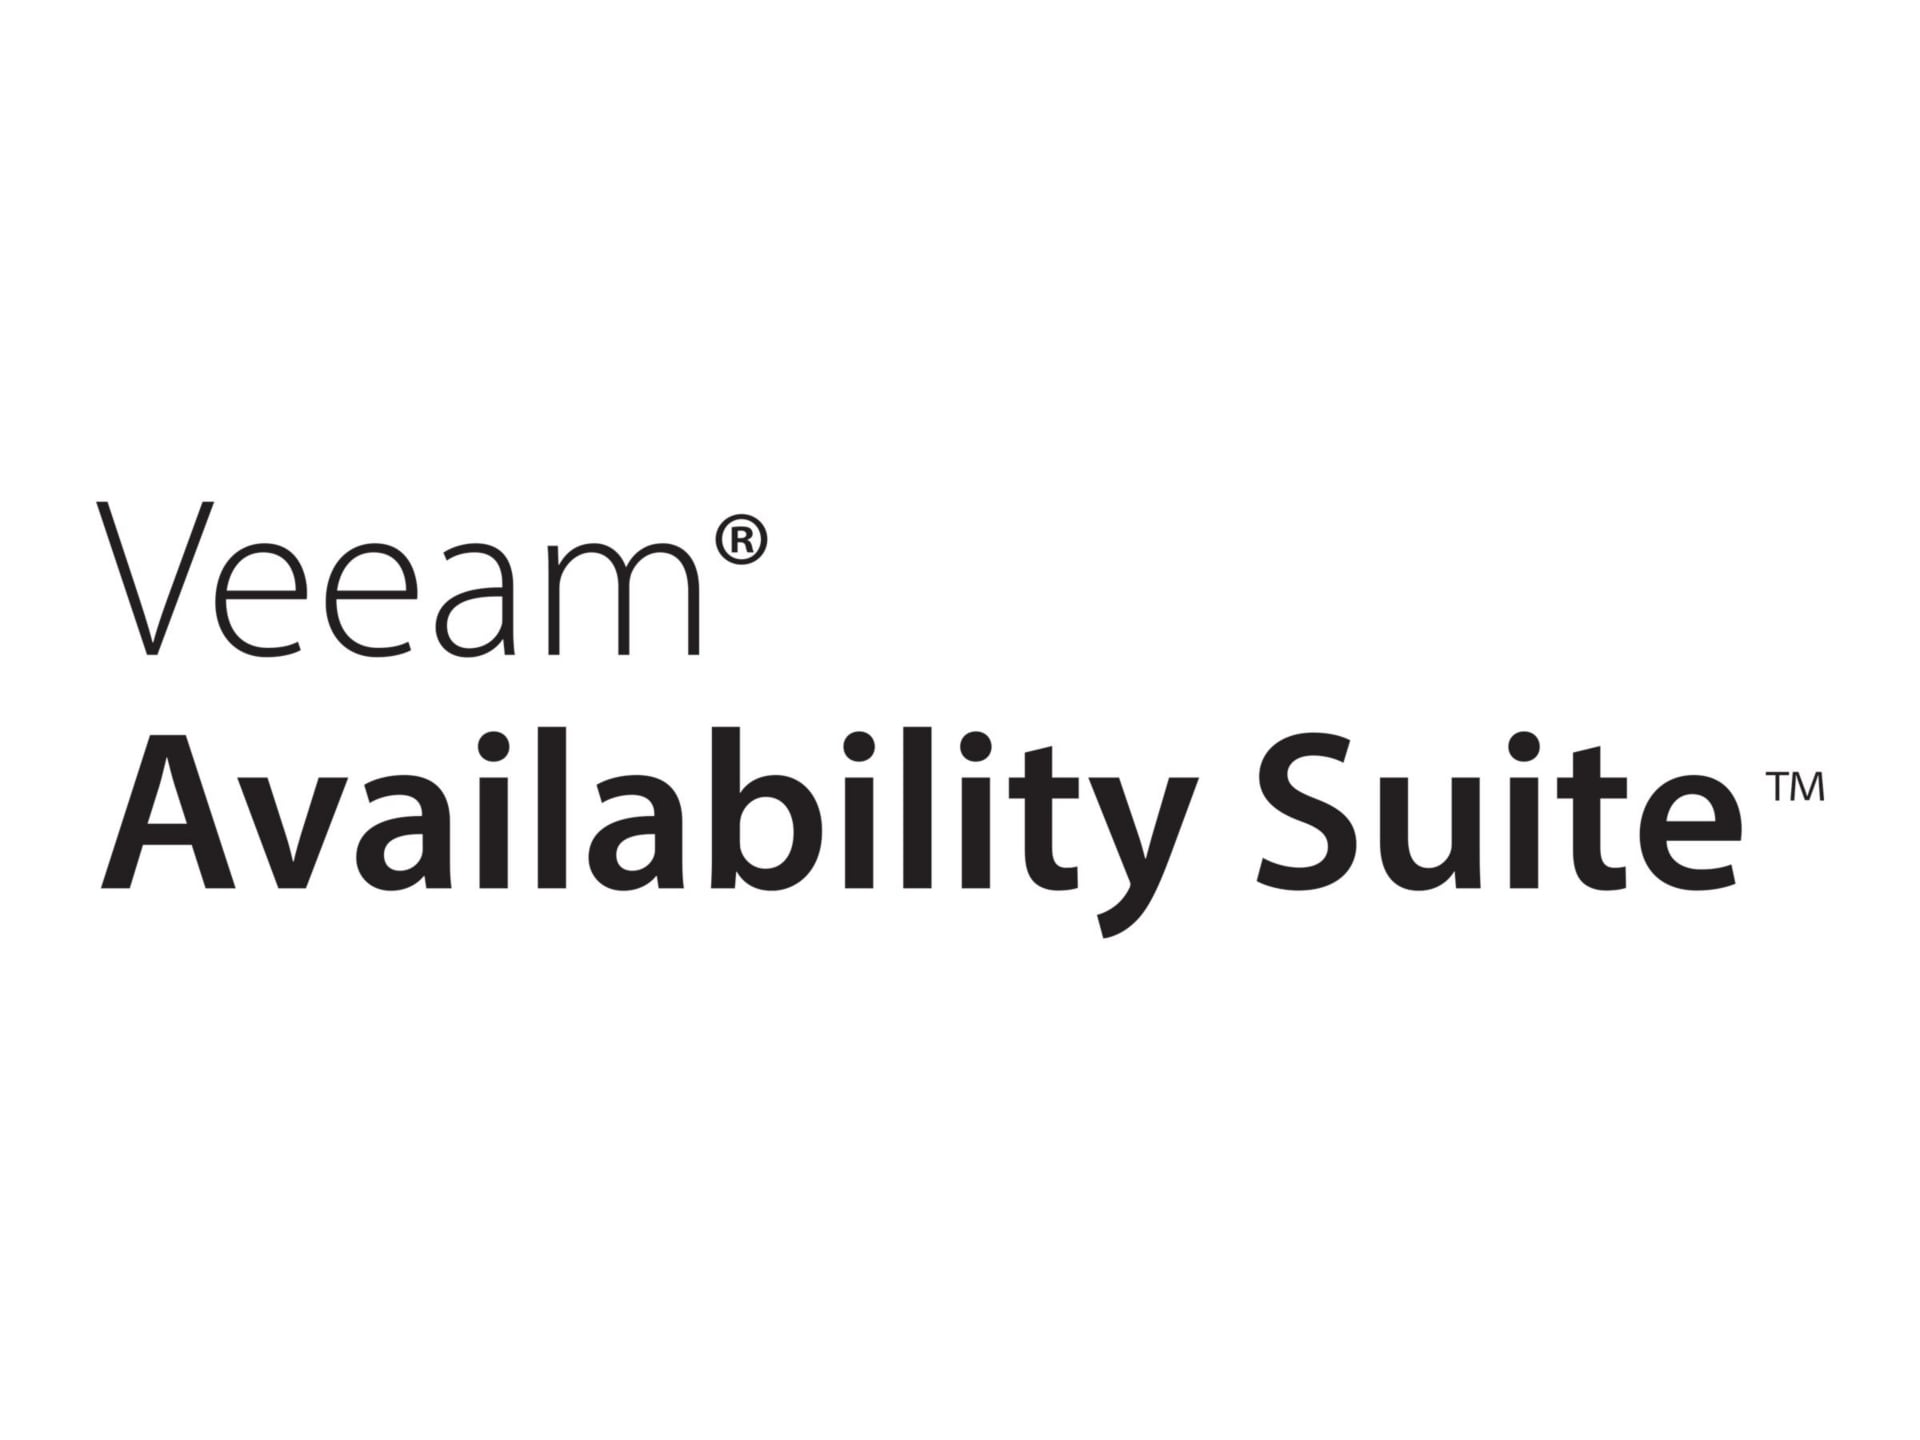 Veeam Availability Suite Universal License - Upfront Billing License (3 yea